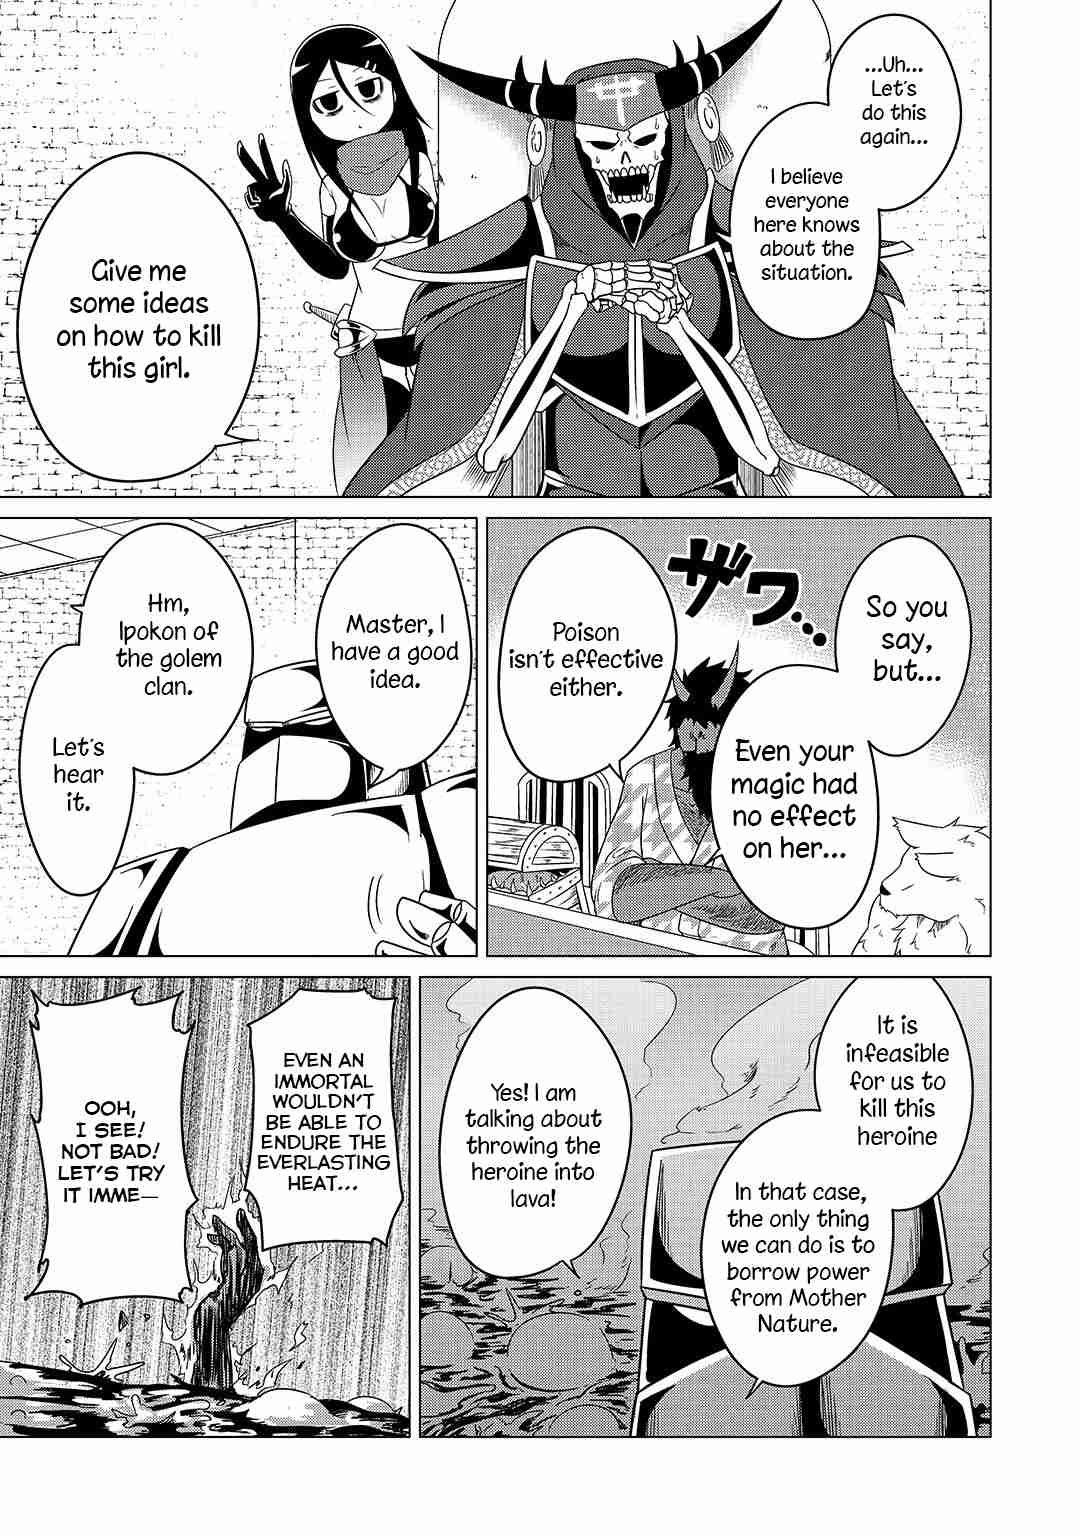 The Devil is Troubled by the Suicidal Heroine Vol. 1 Ch. 4 Emergency meeting at the Devil's castle